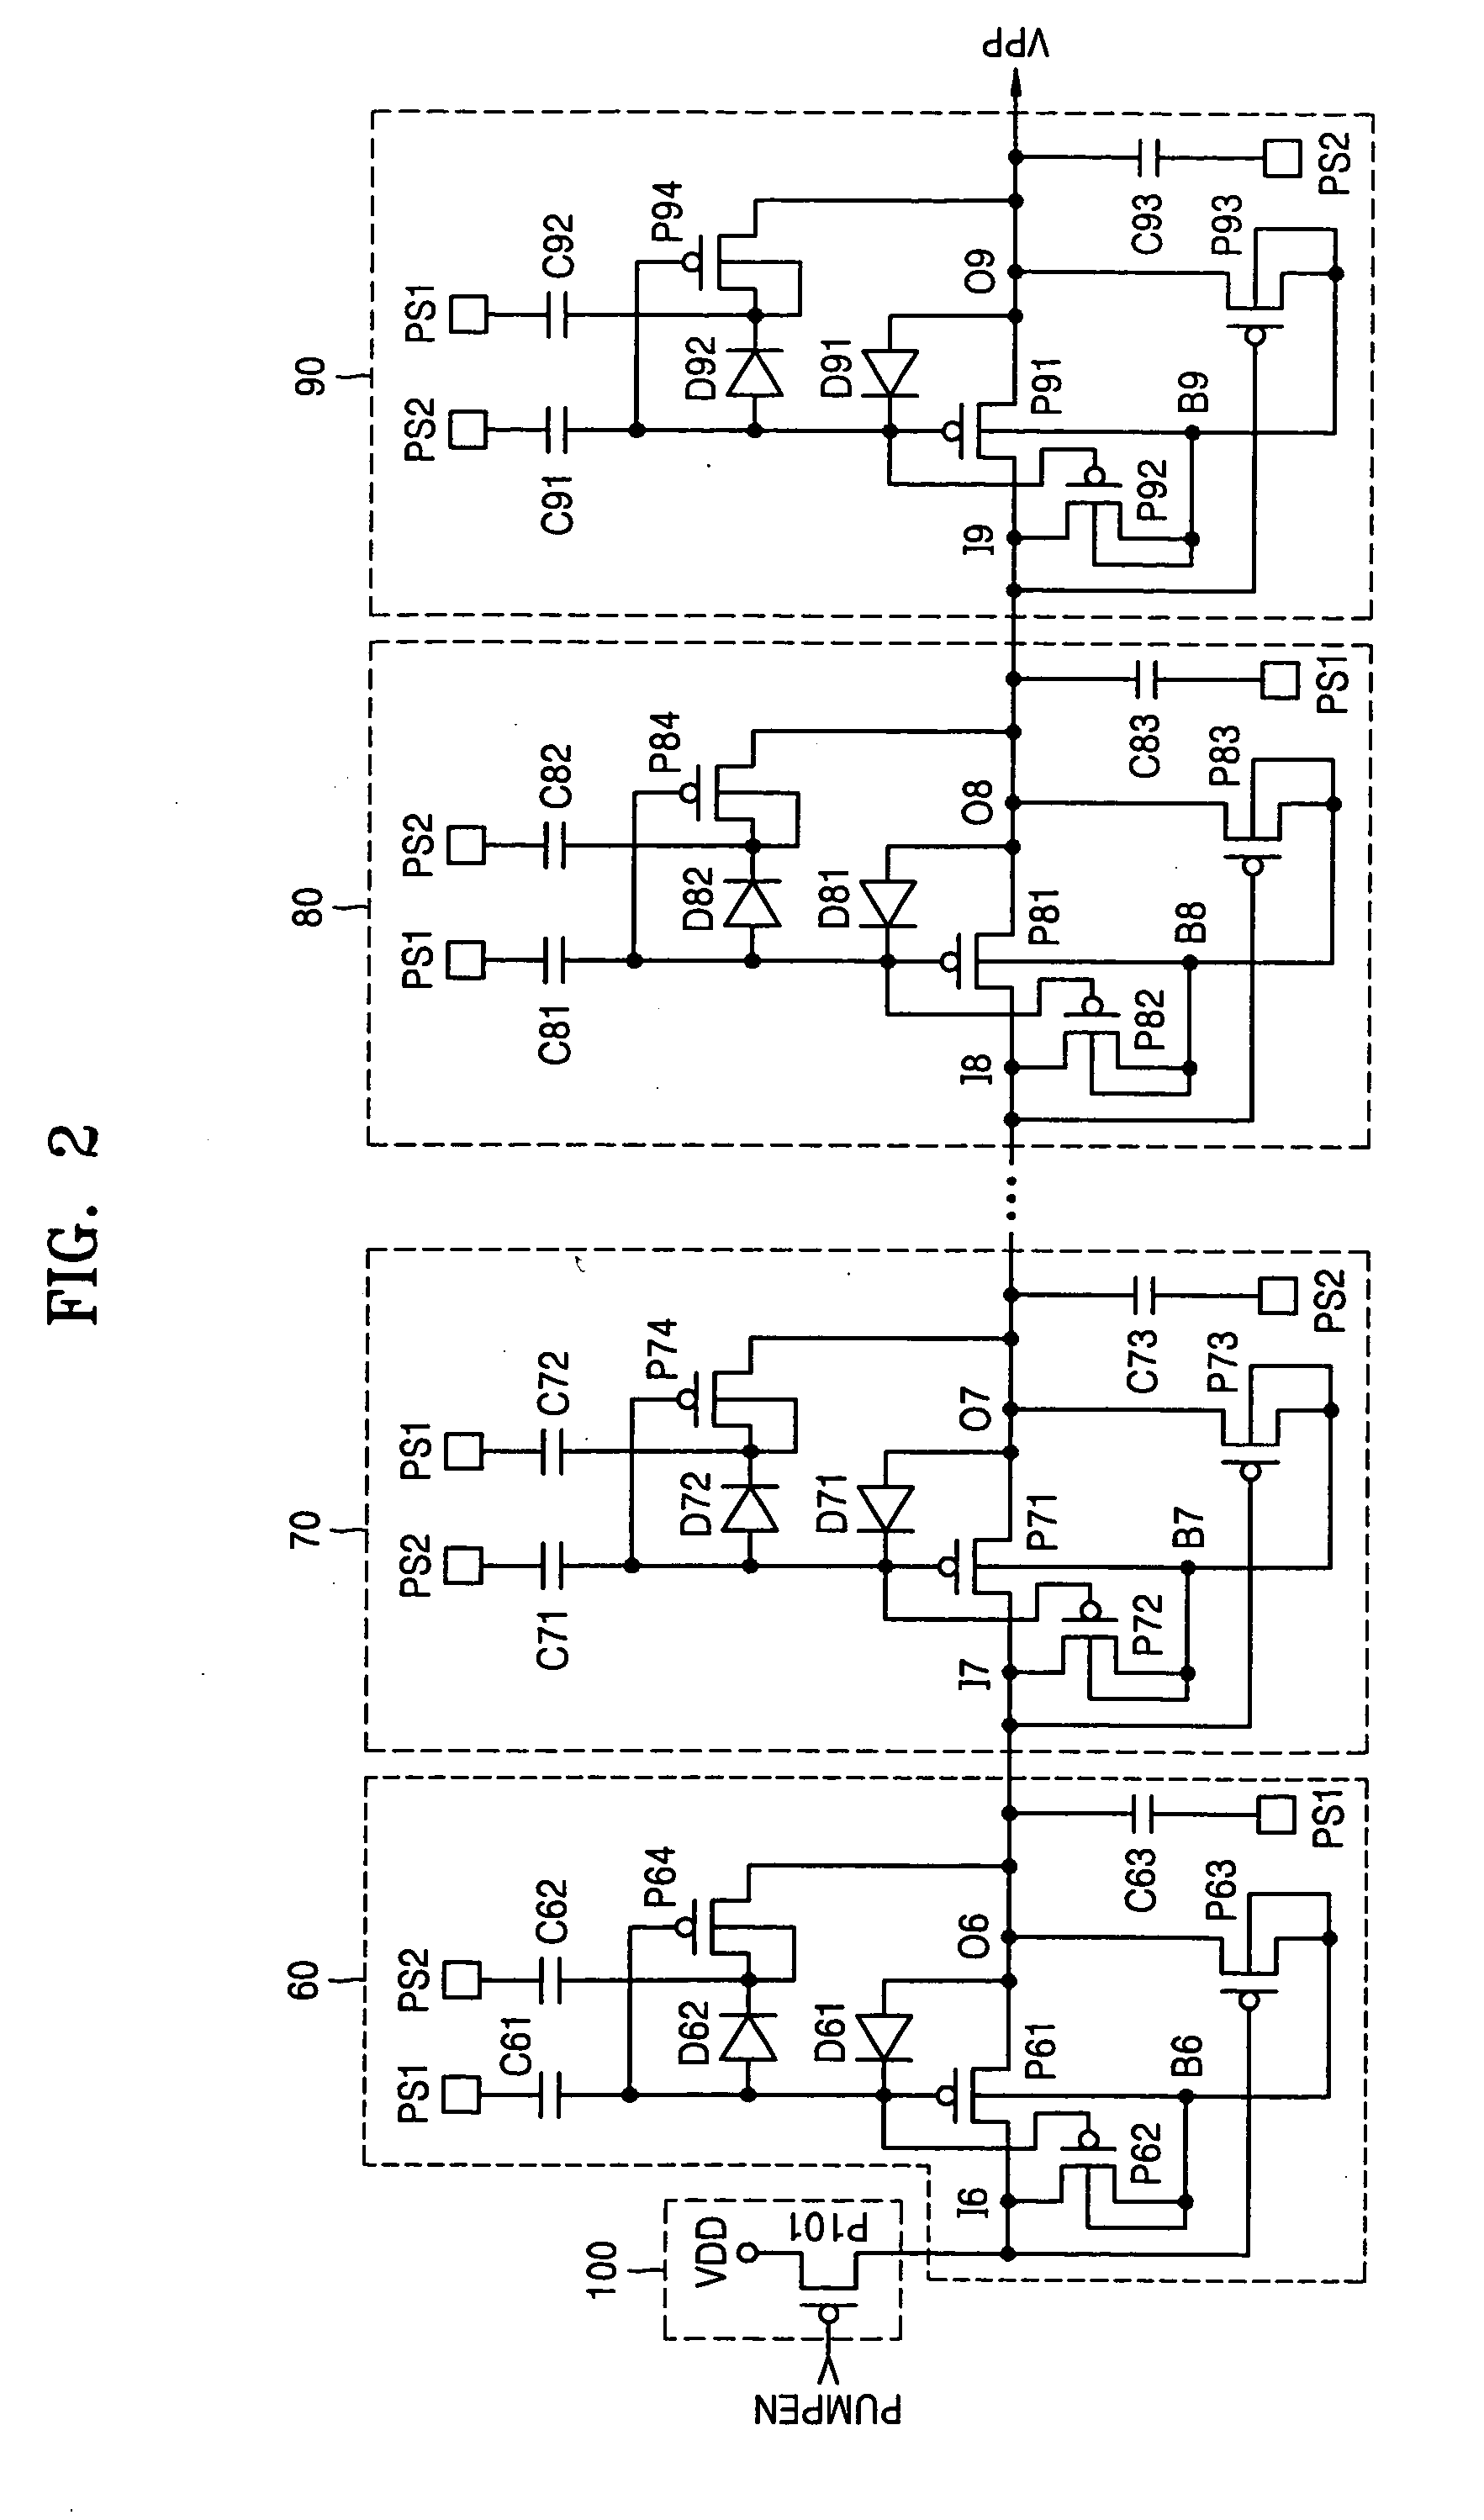 Charge pump circuit having high charge transfer efficiency